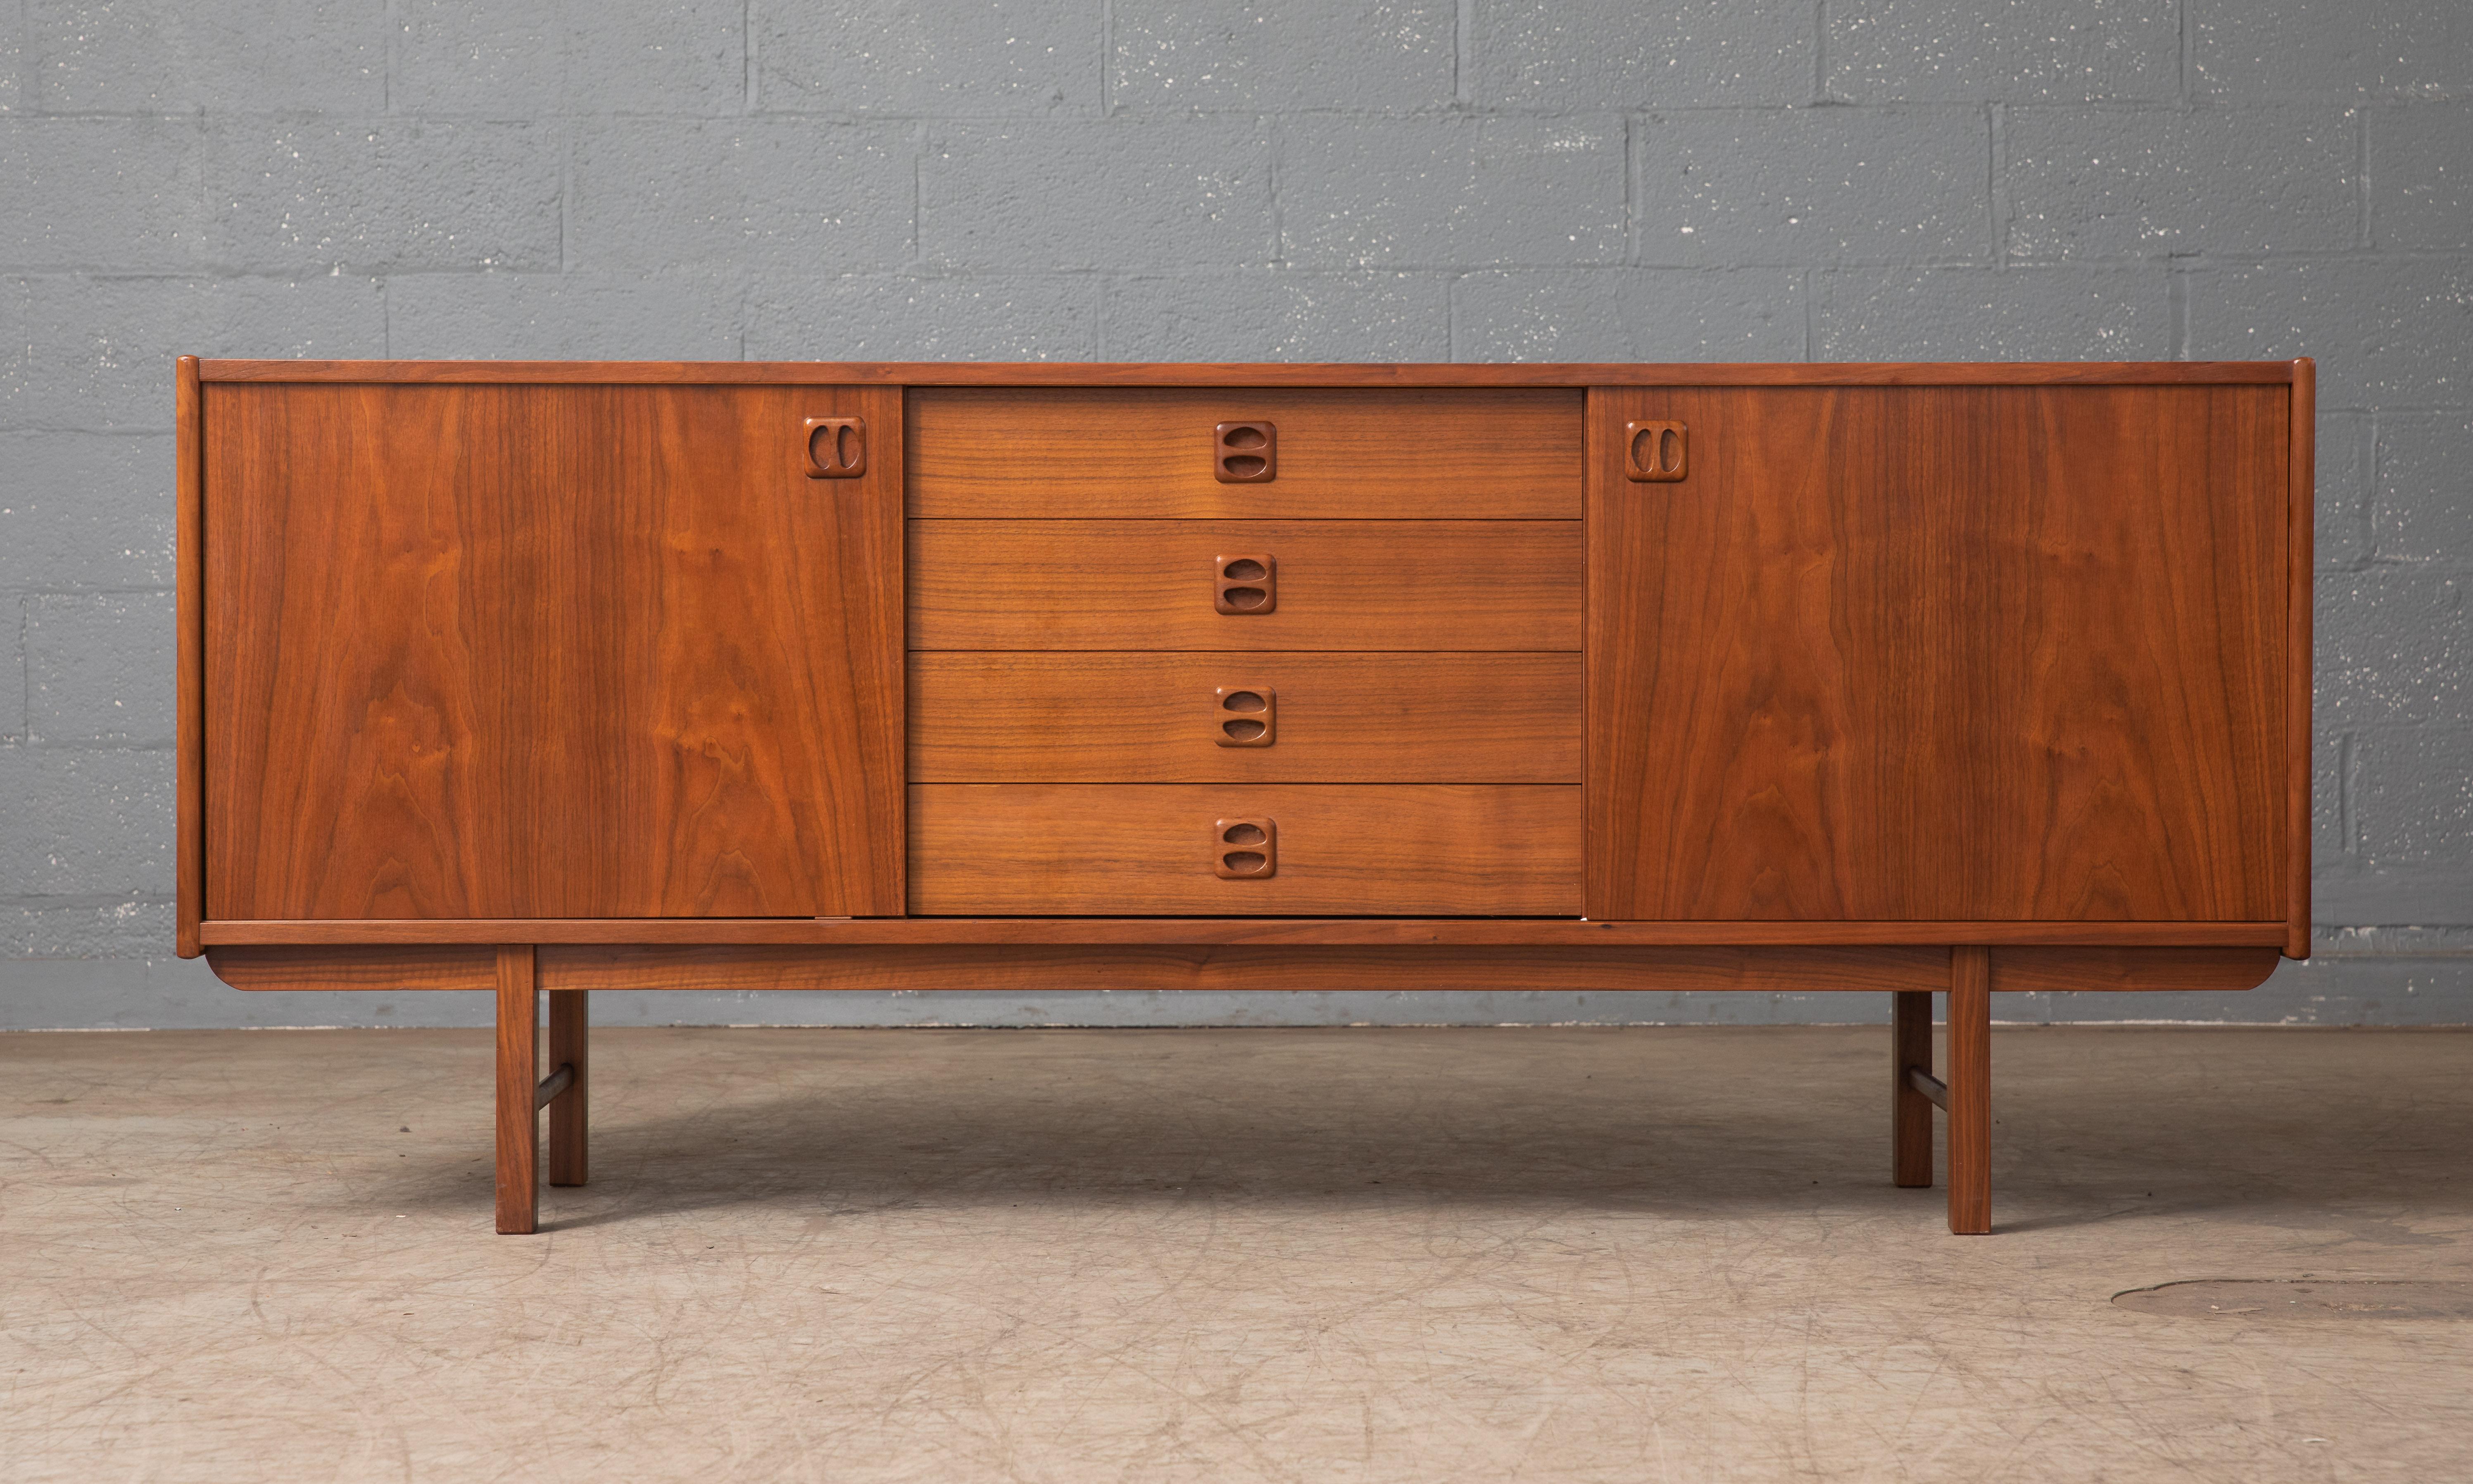 Beautiful Danish 1960s low sideboard in teak in the style of Kai Kristiansen. Nice center drawer section flanked by compartments with adjustable shelves behind nice bookmatched sliding doors with carved pulls. Nice base in solid teak. Very elegant